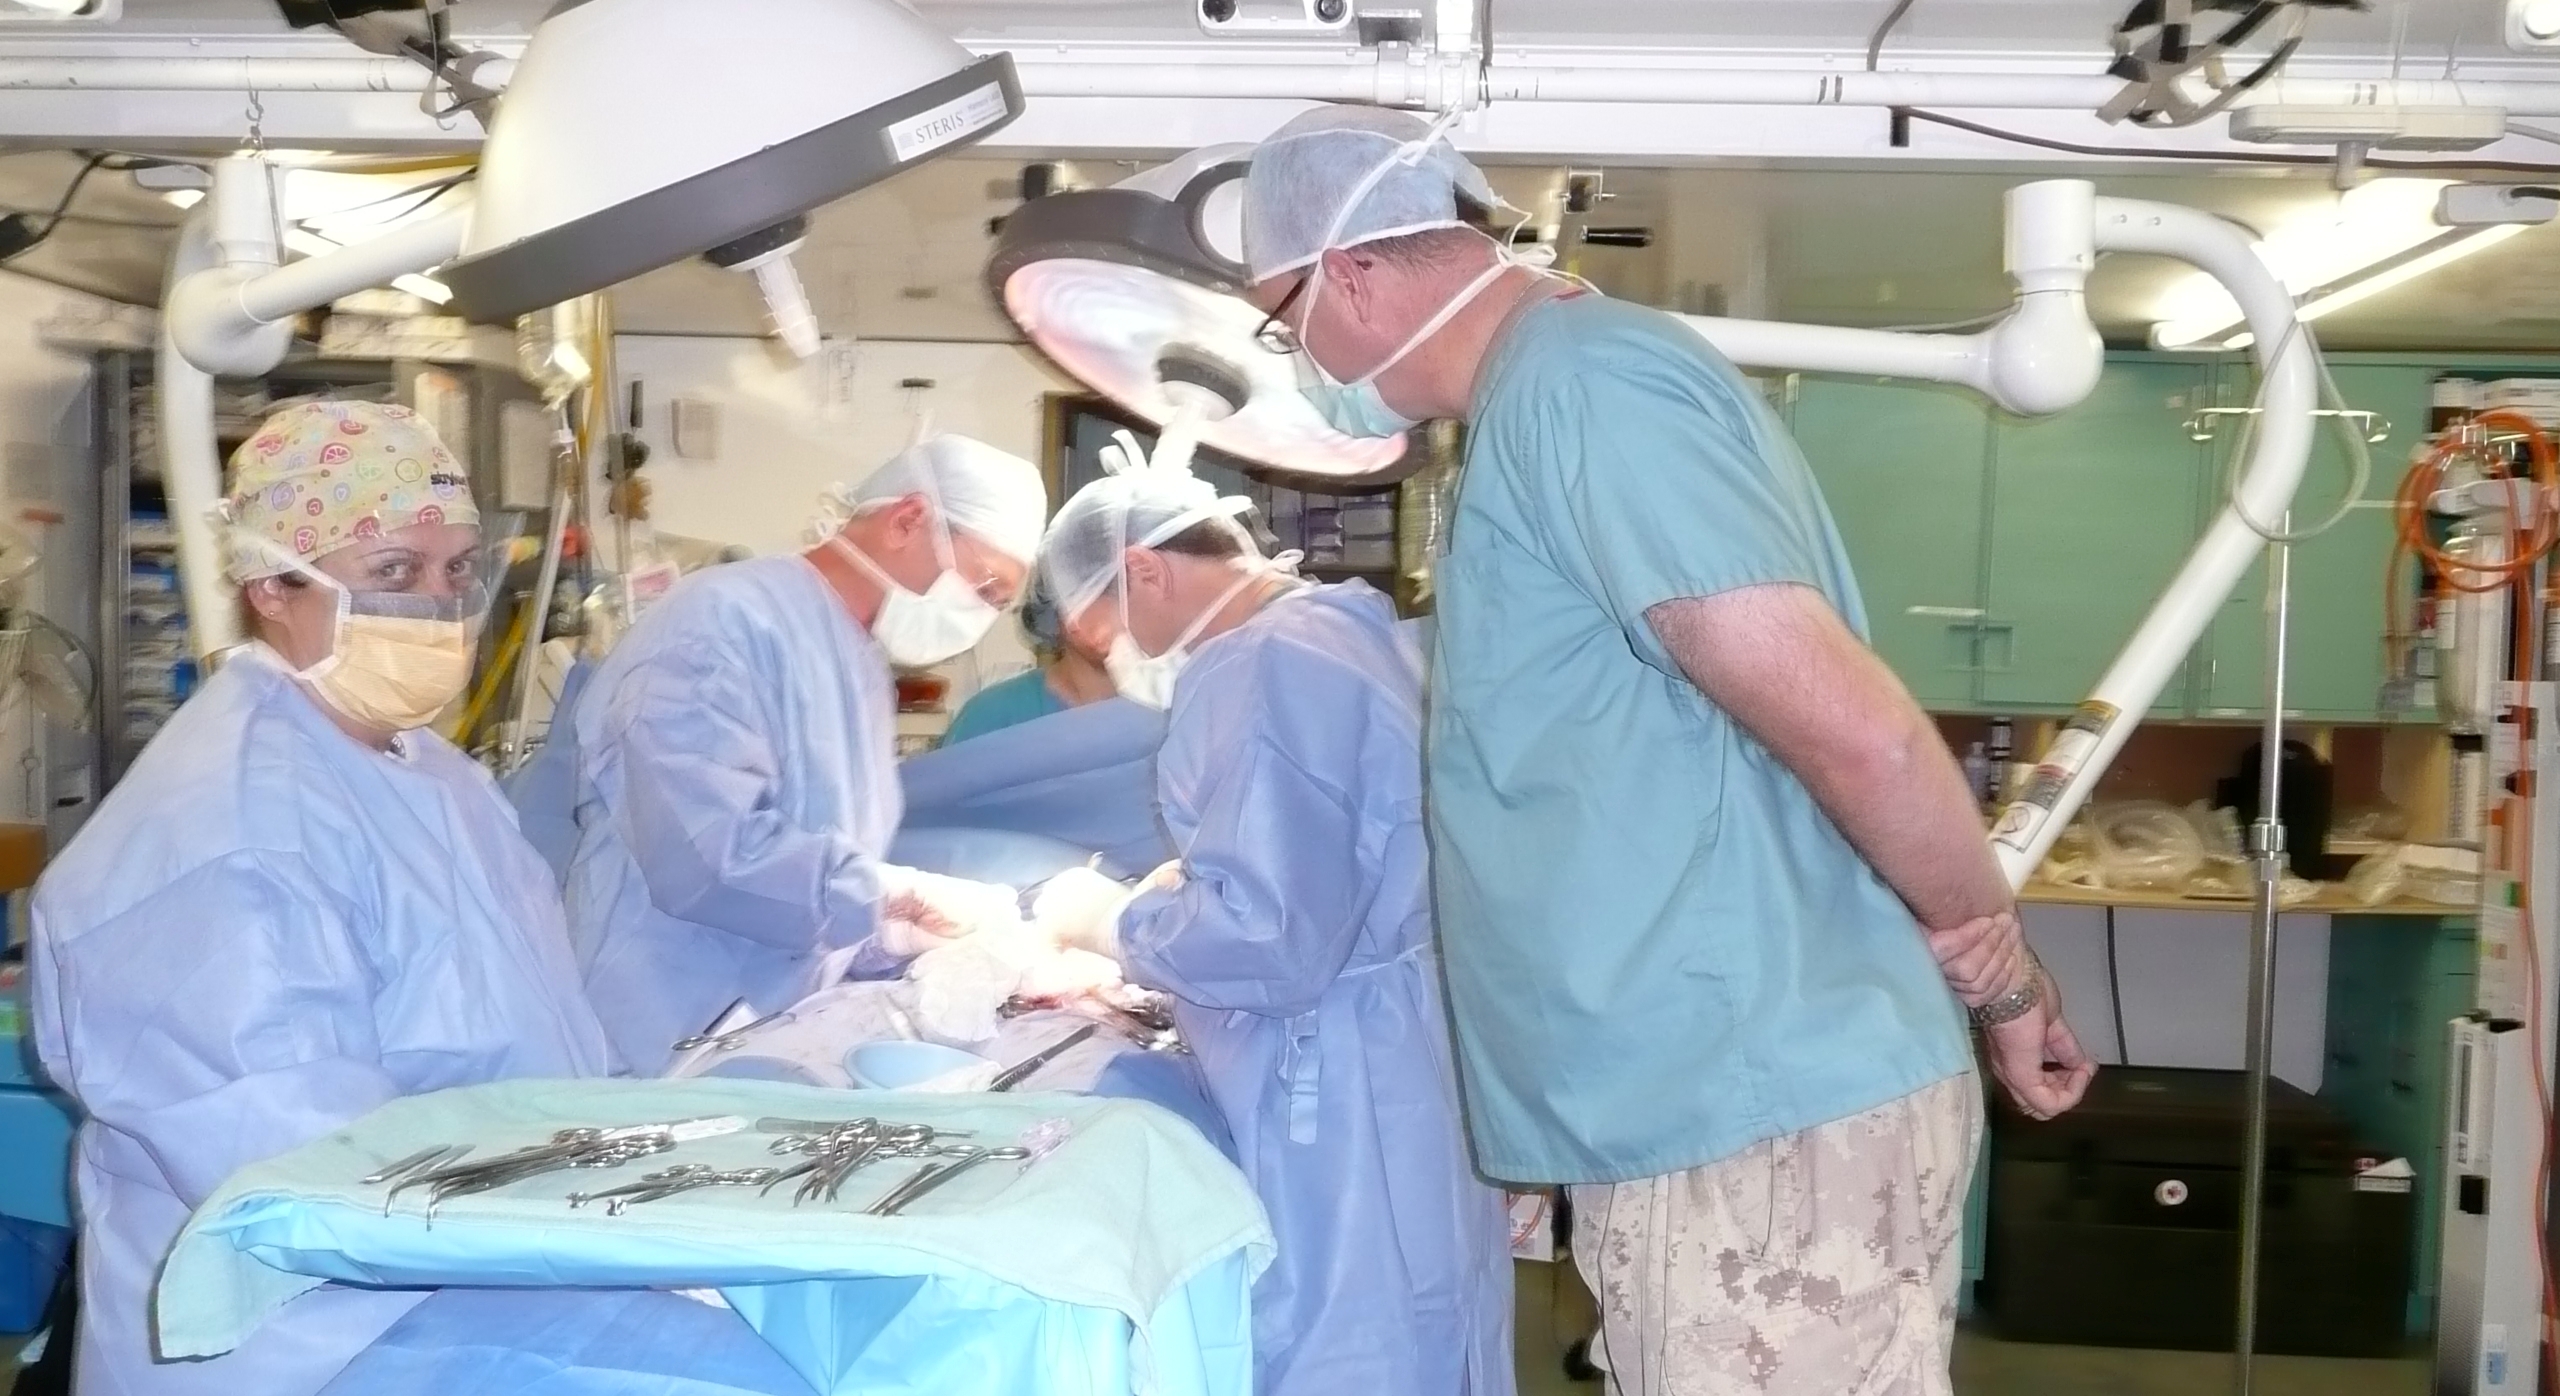 Miltary doctors in surgery